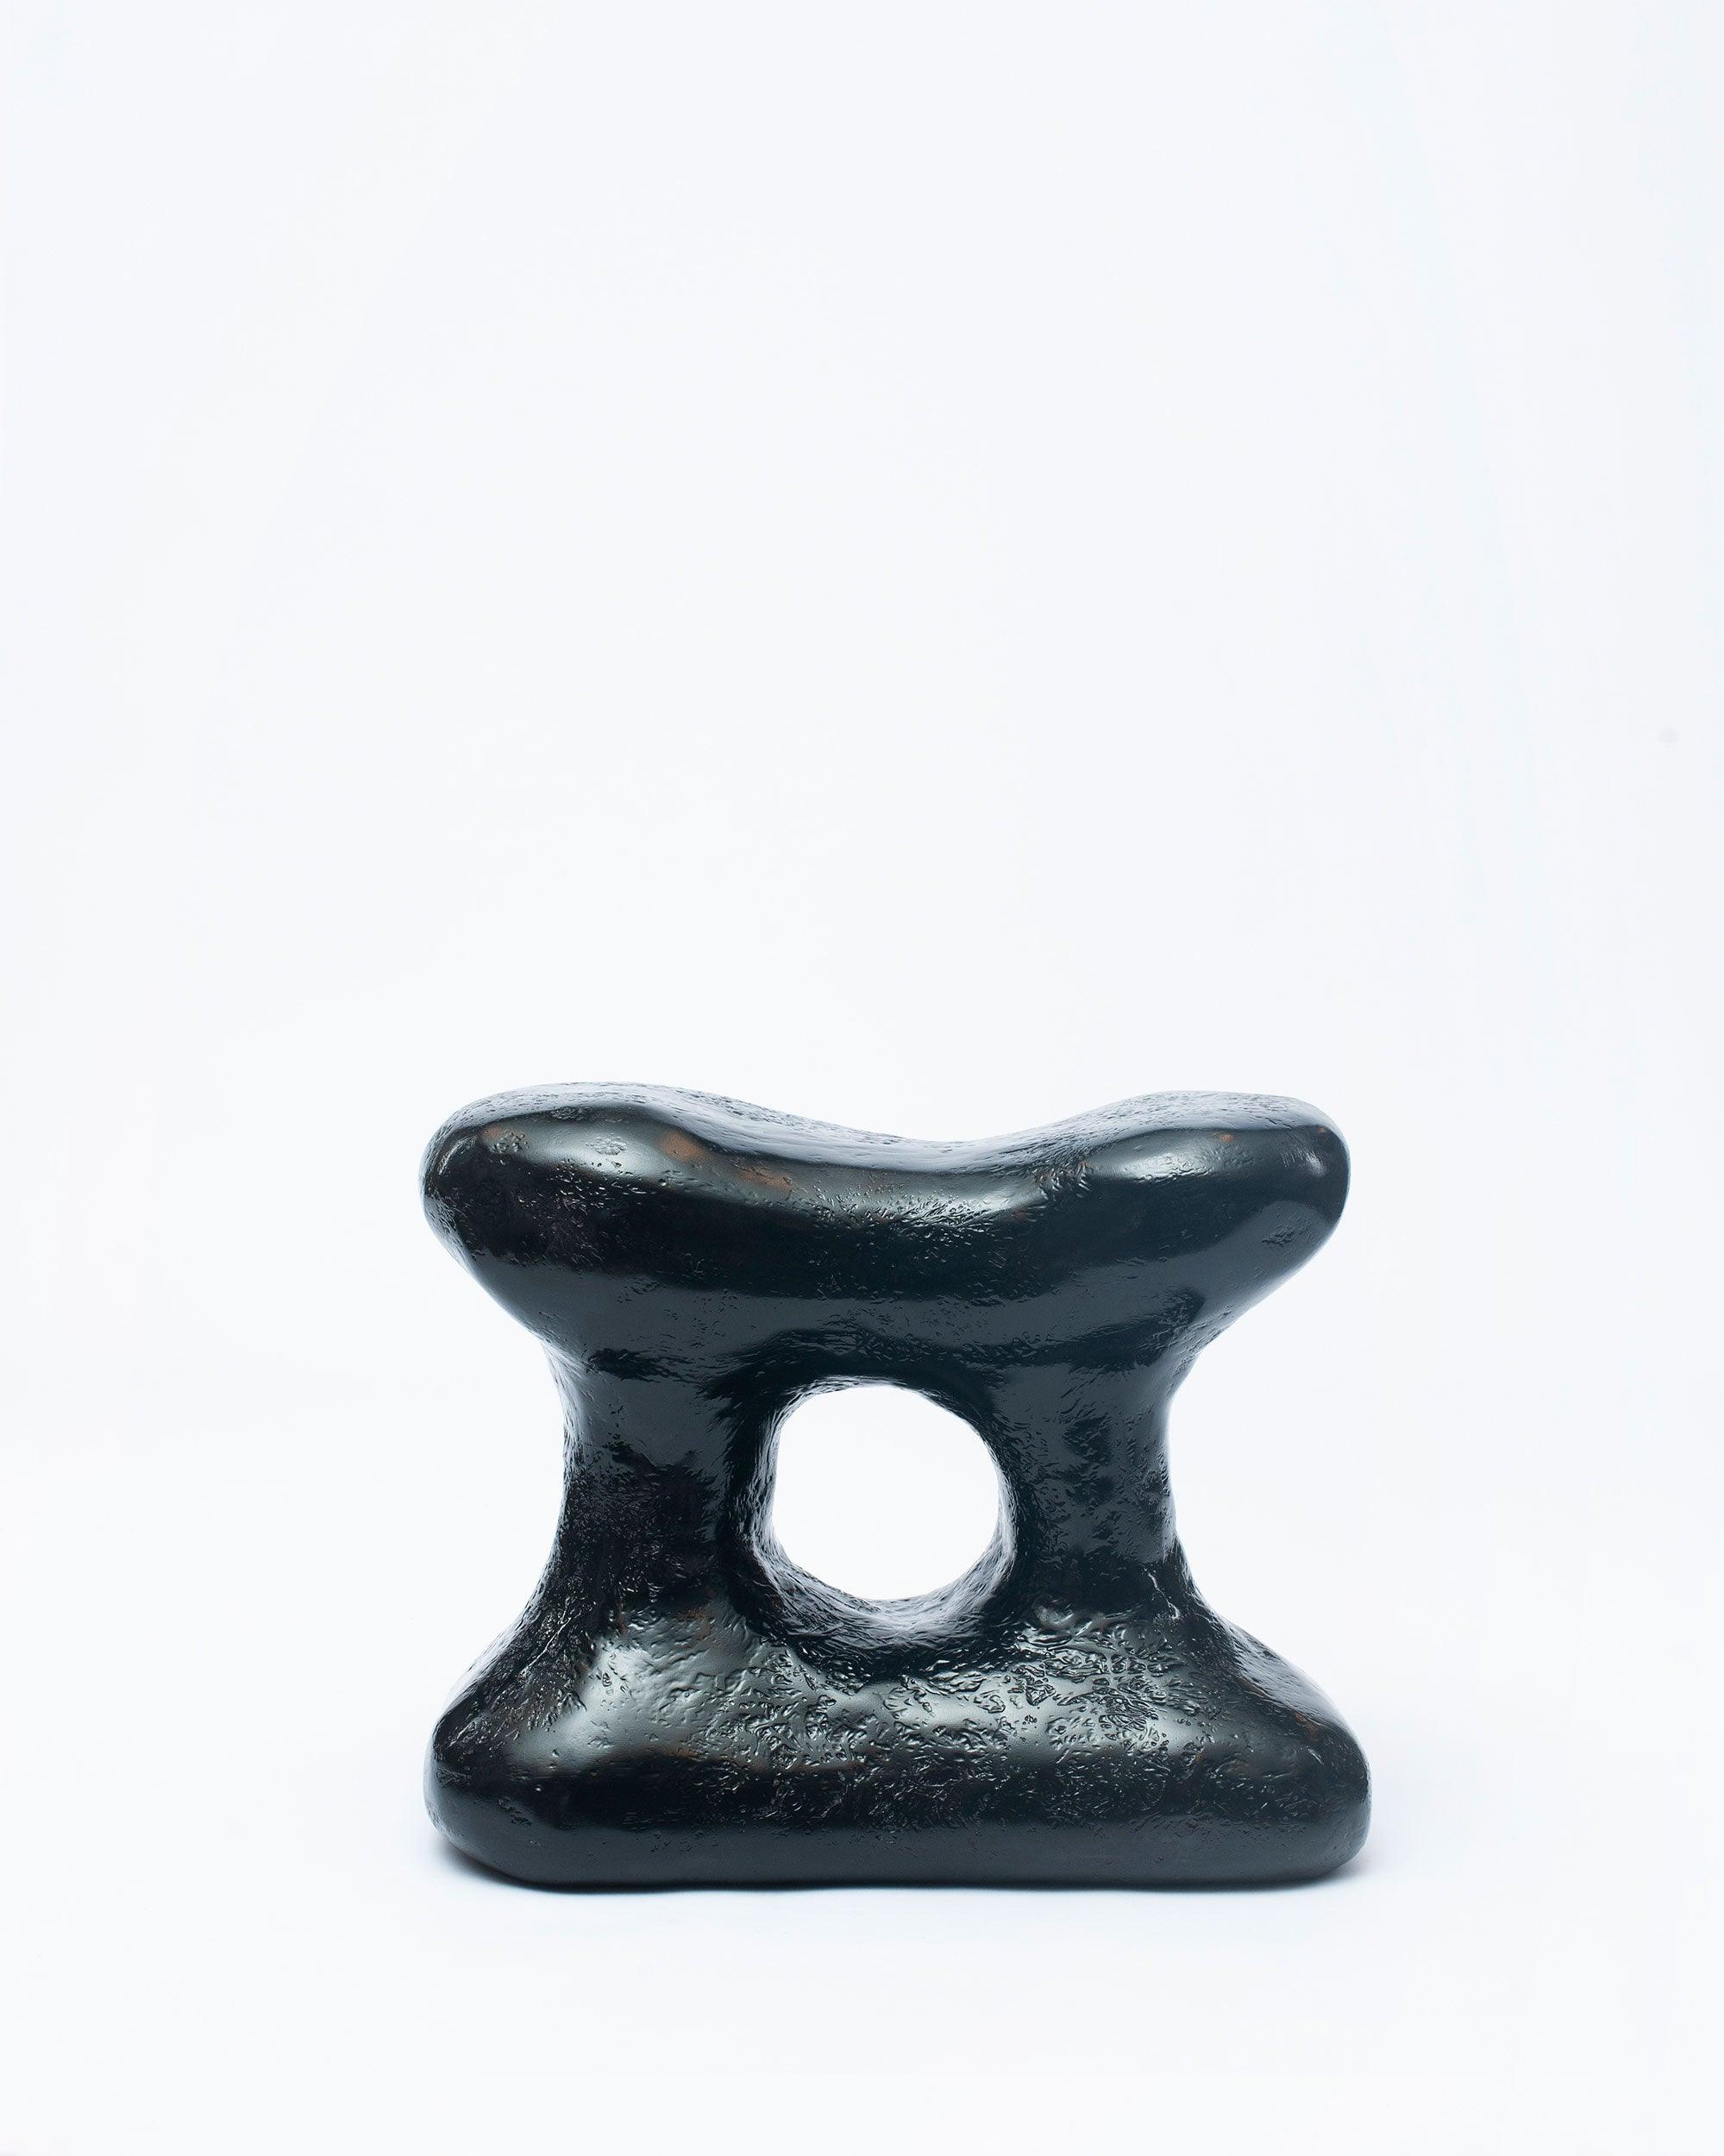 Hand-carved collectible black stool by NIKO JUNE in white background